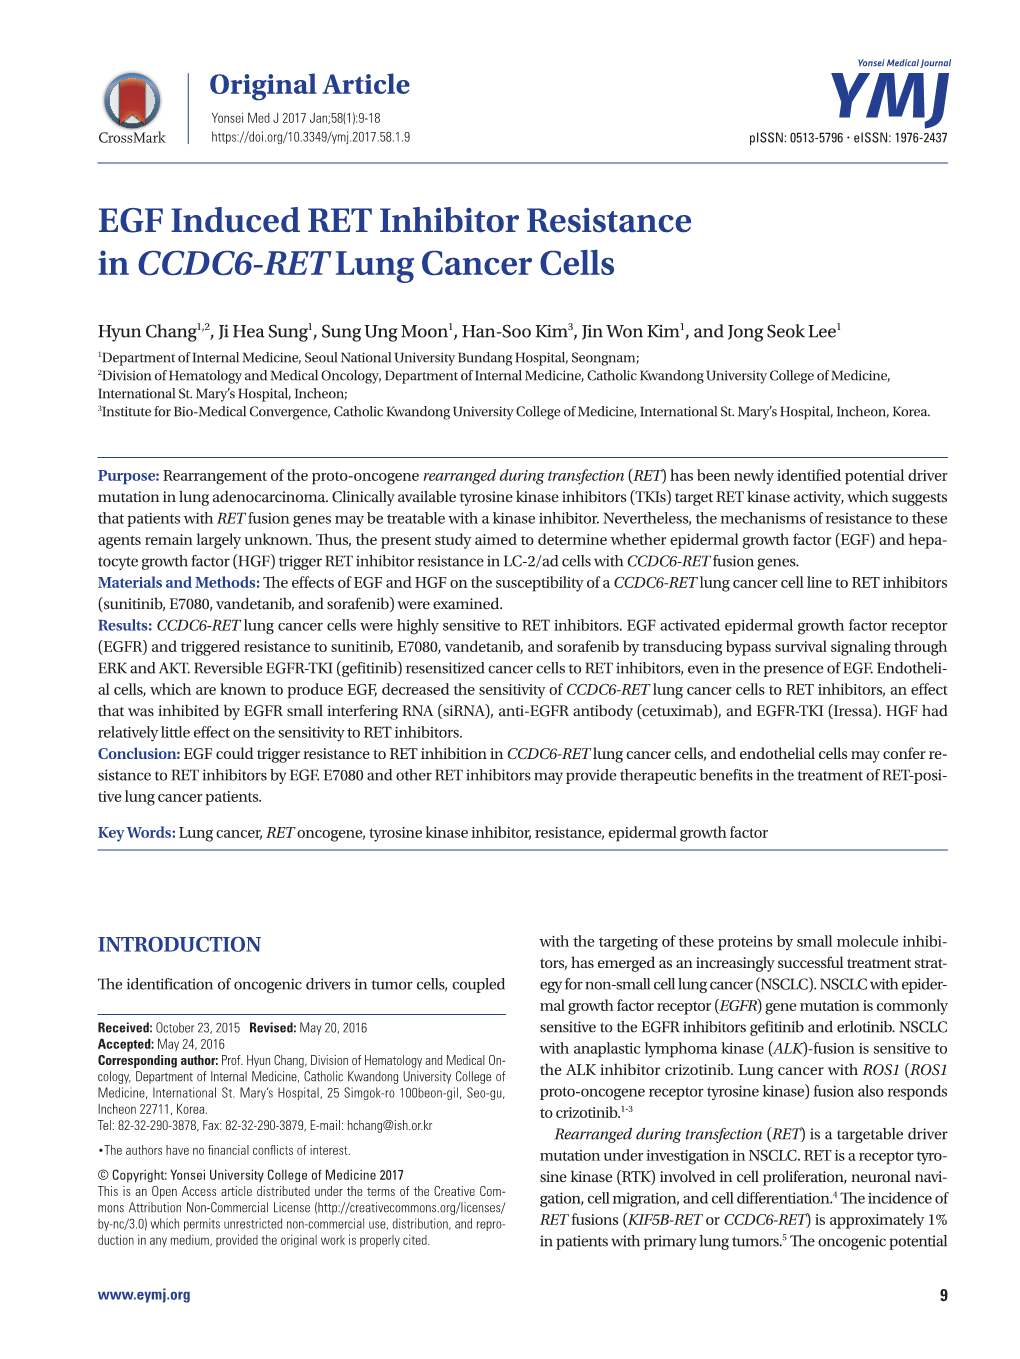 EGF Induced RET Inhibitor Resistance in CCDC6-Retlung Cancer Cells